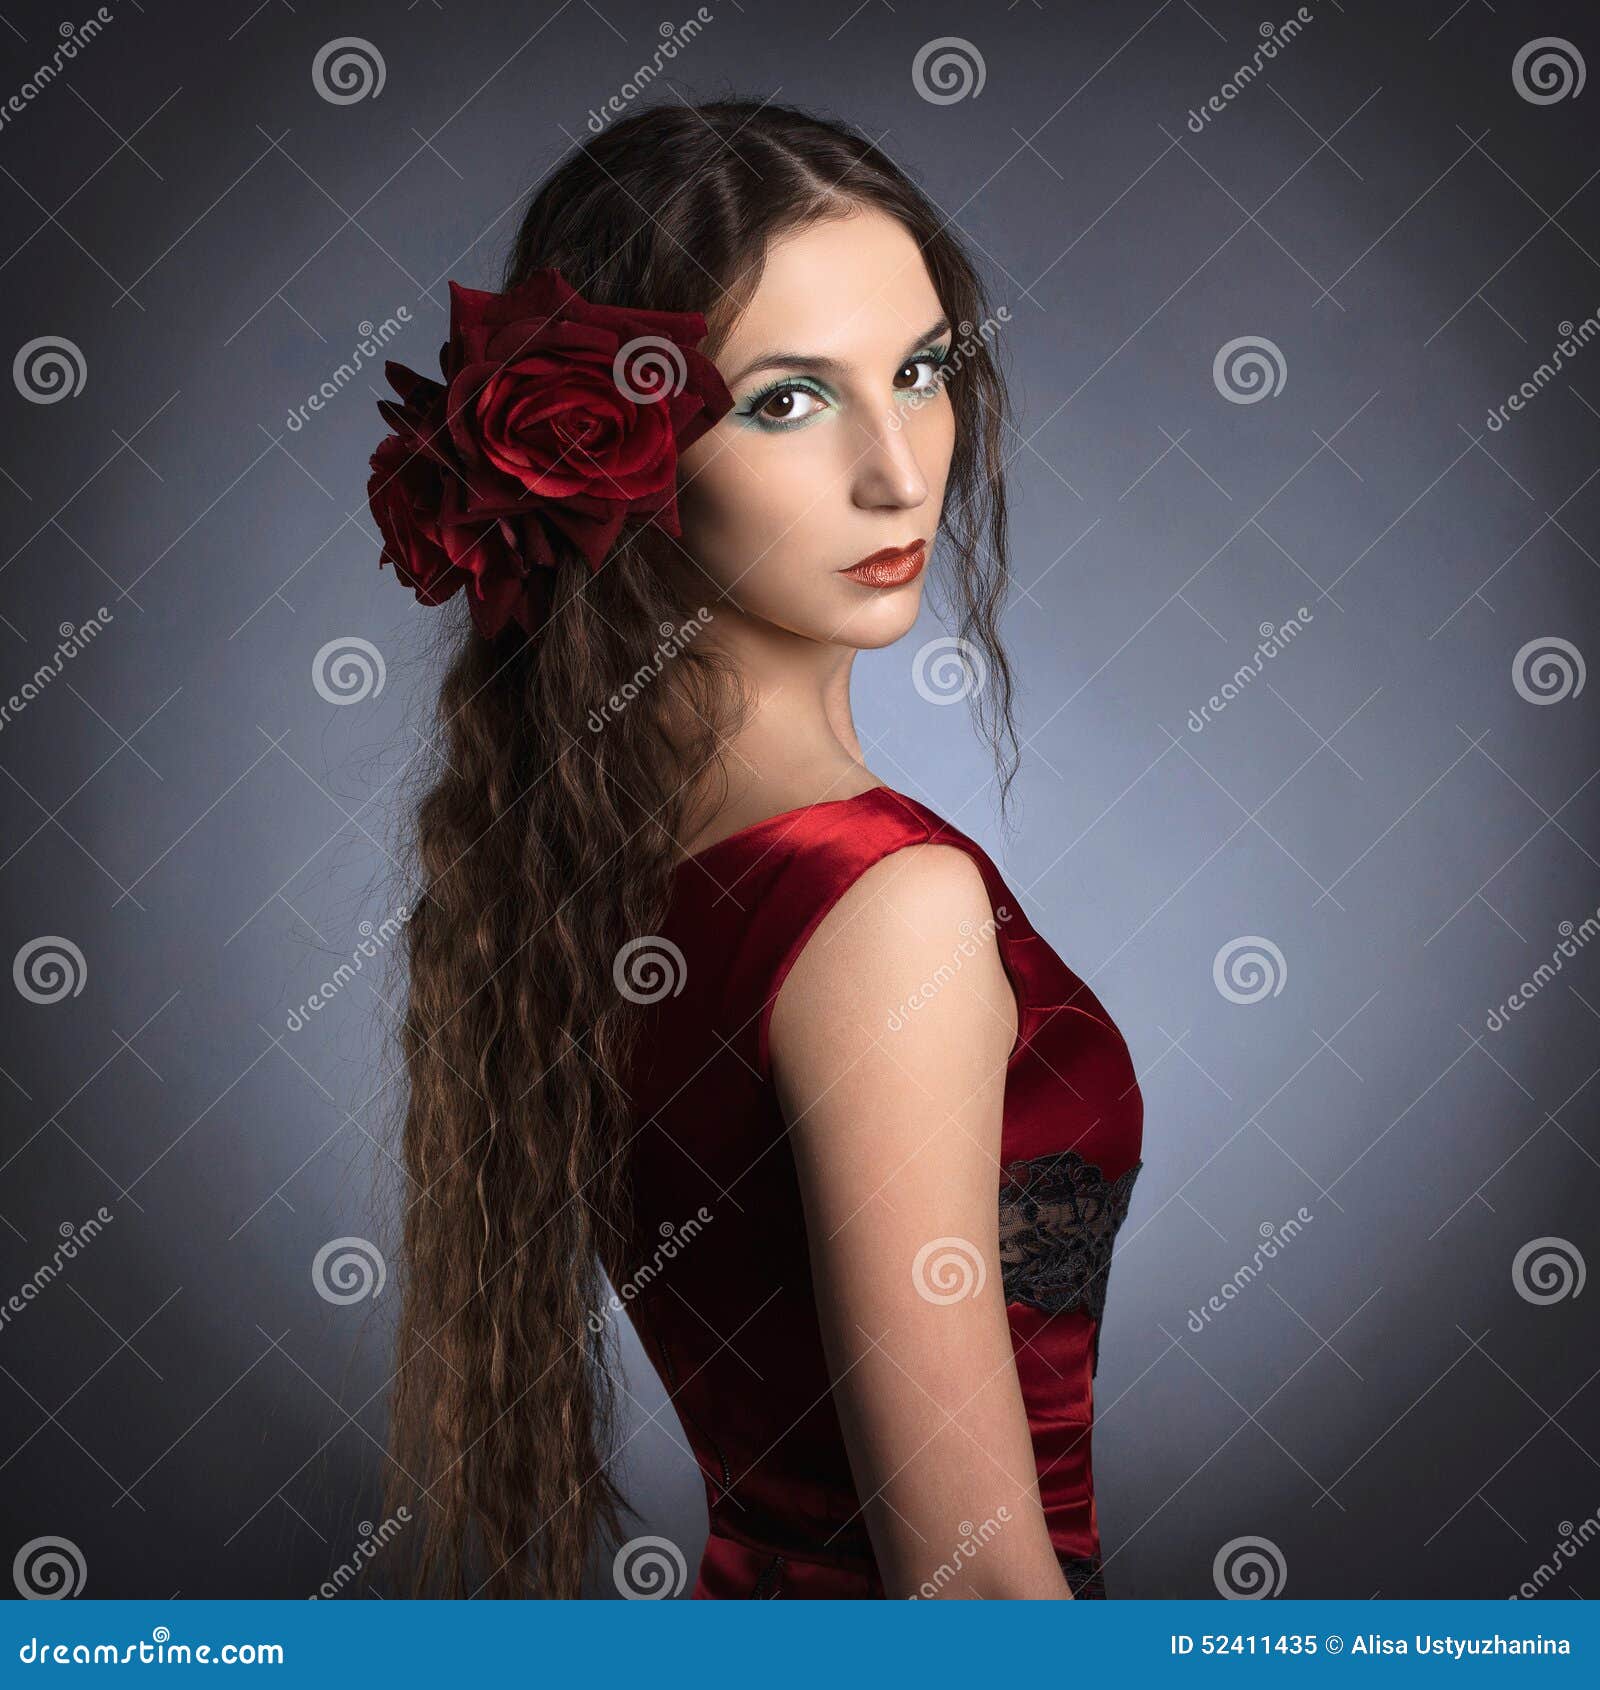 Beads and red roses on the messy curls and braids  FashionShala